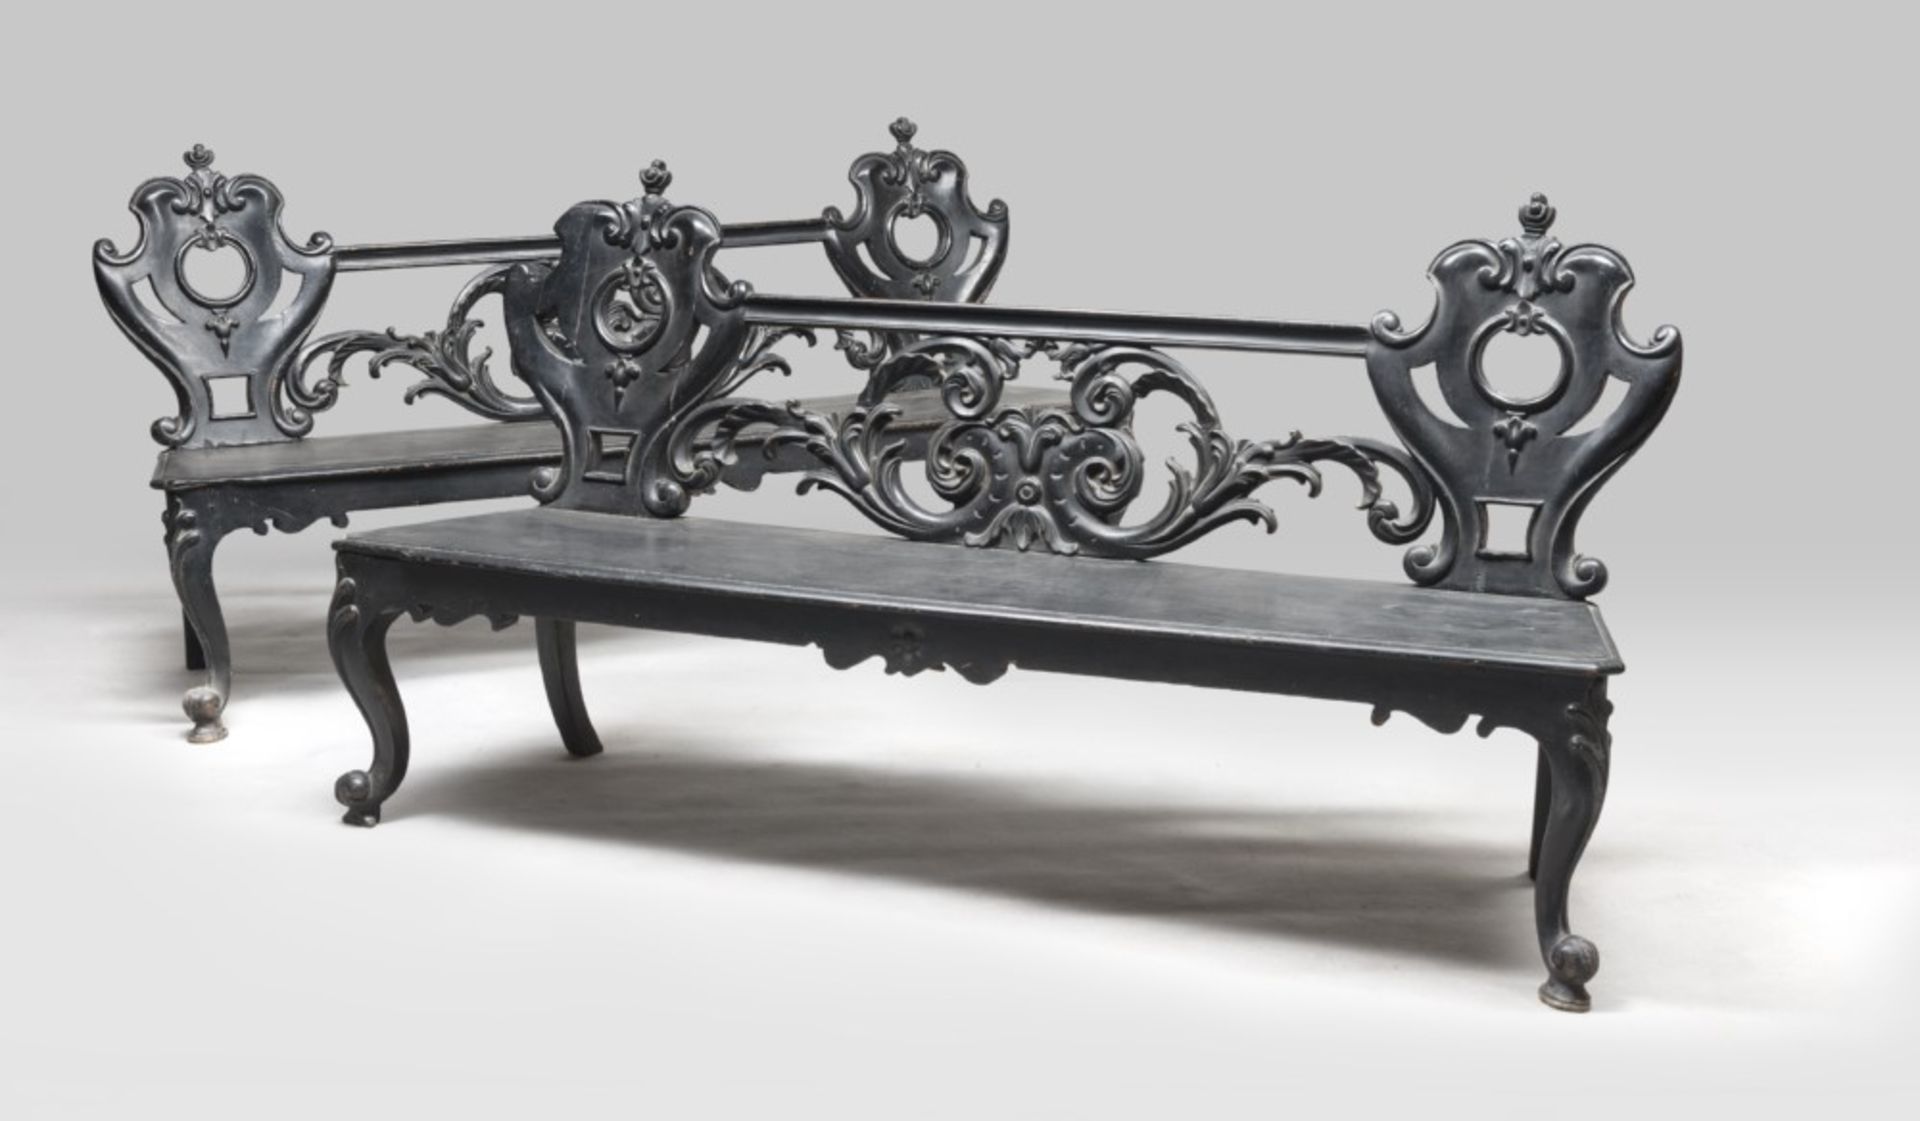 PAIR OF EBONY BENCHES, EMILIA OR FRANCE 19TH CENTURY with perforated back panels and carved by